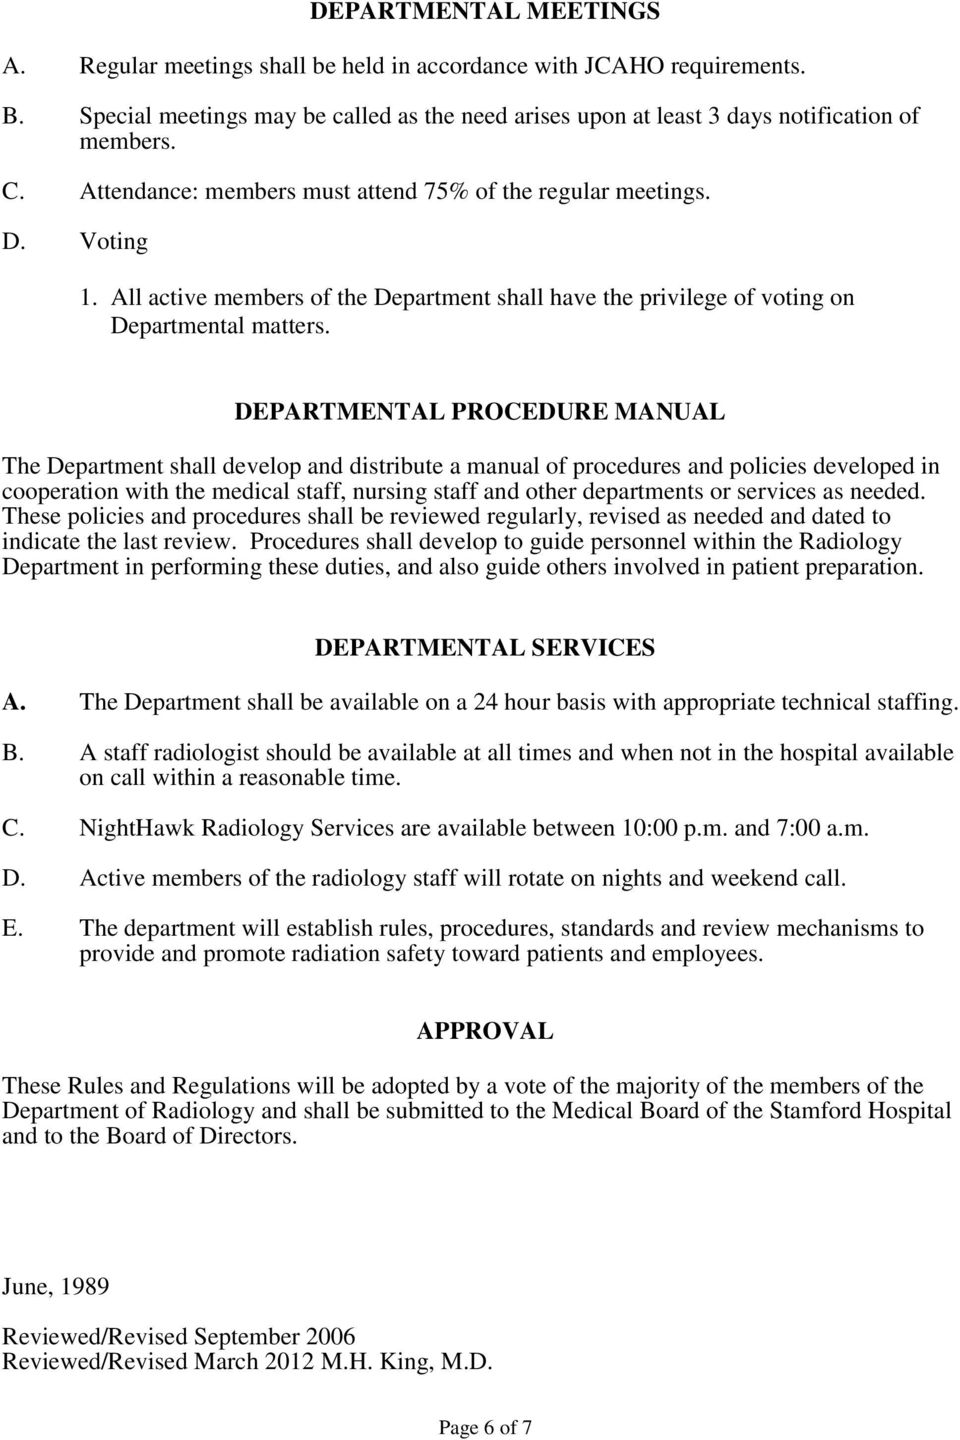 DEPARTMENTAL PROCEDURE MANUAL The Department shall develop and distribute a manual of procedures and policies developed in cooperation with the medical staff, nursing staff and other departments or